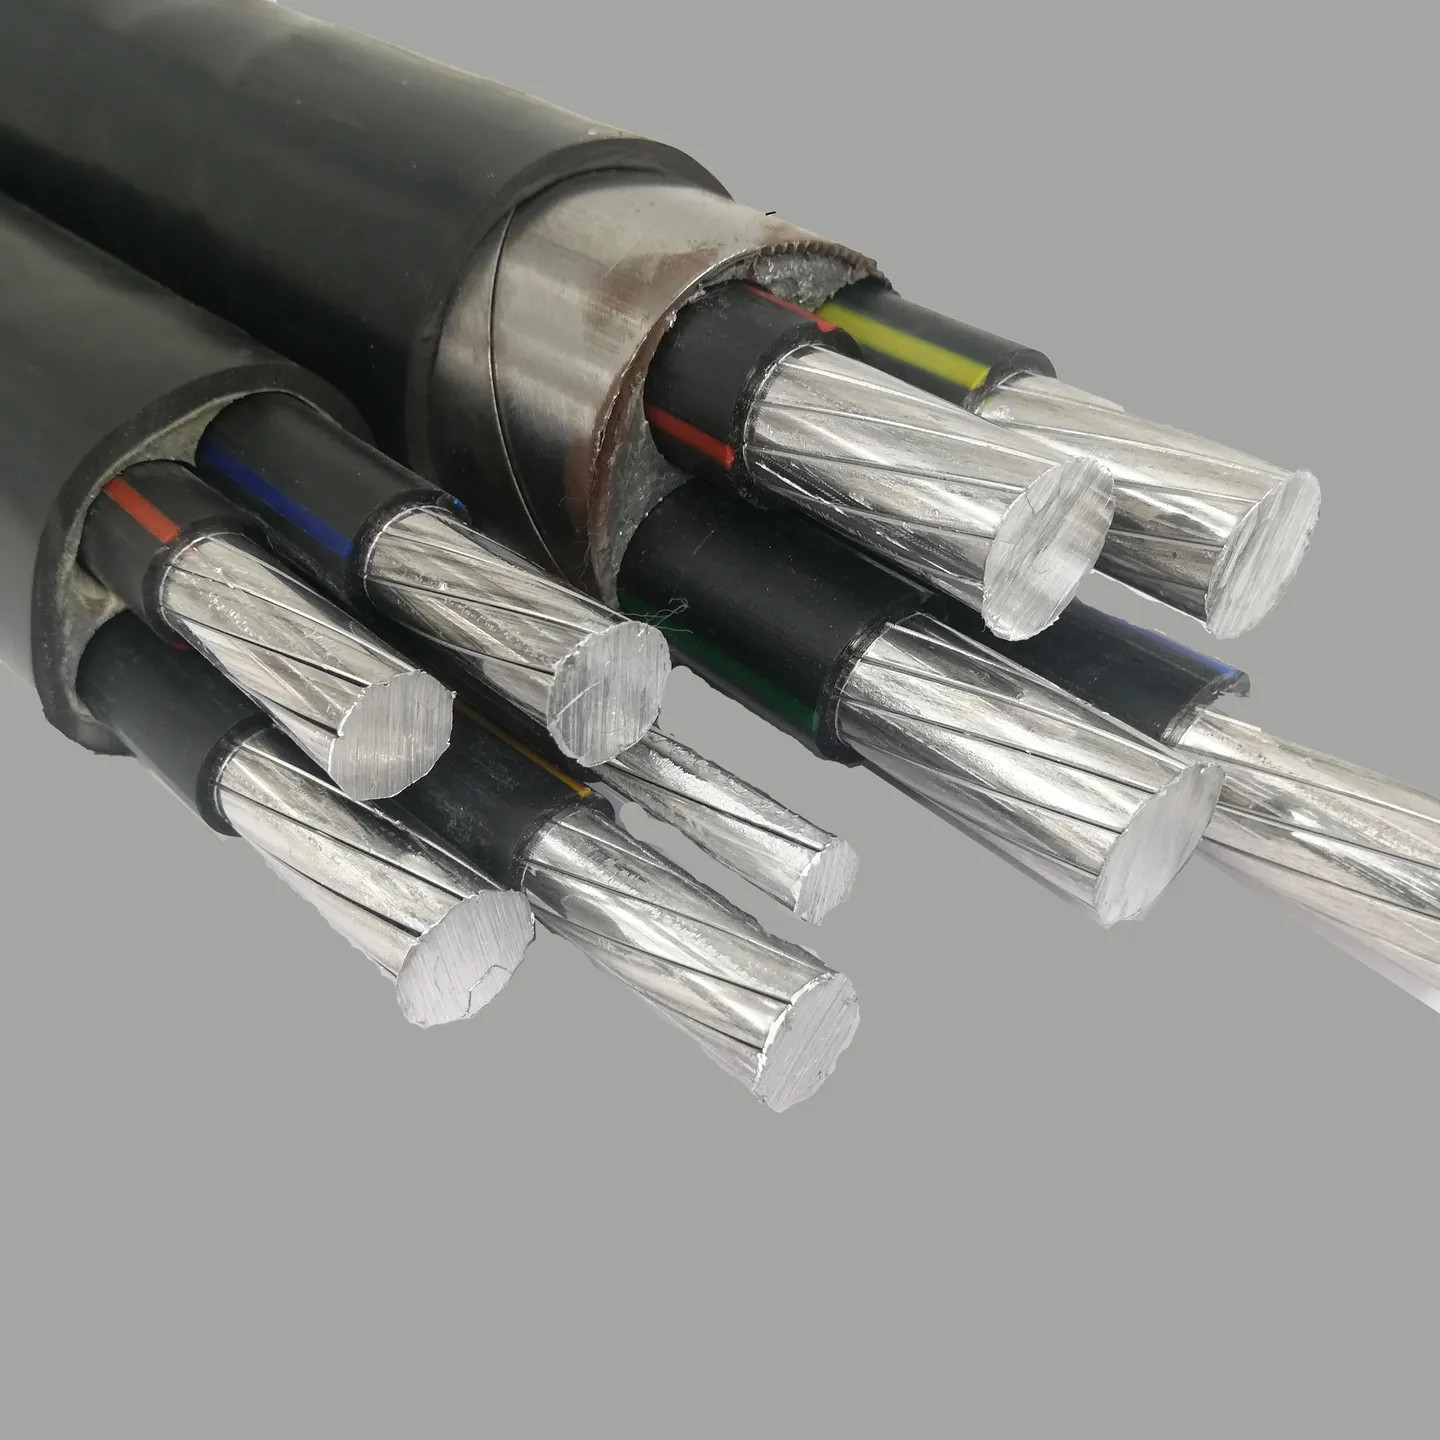 Which one is more expensive, aluminum alloy cable or aluminum core cable？